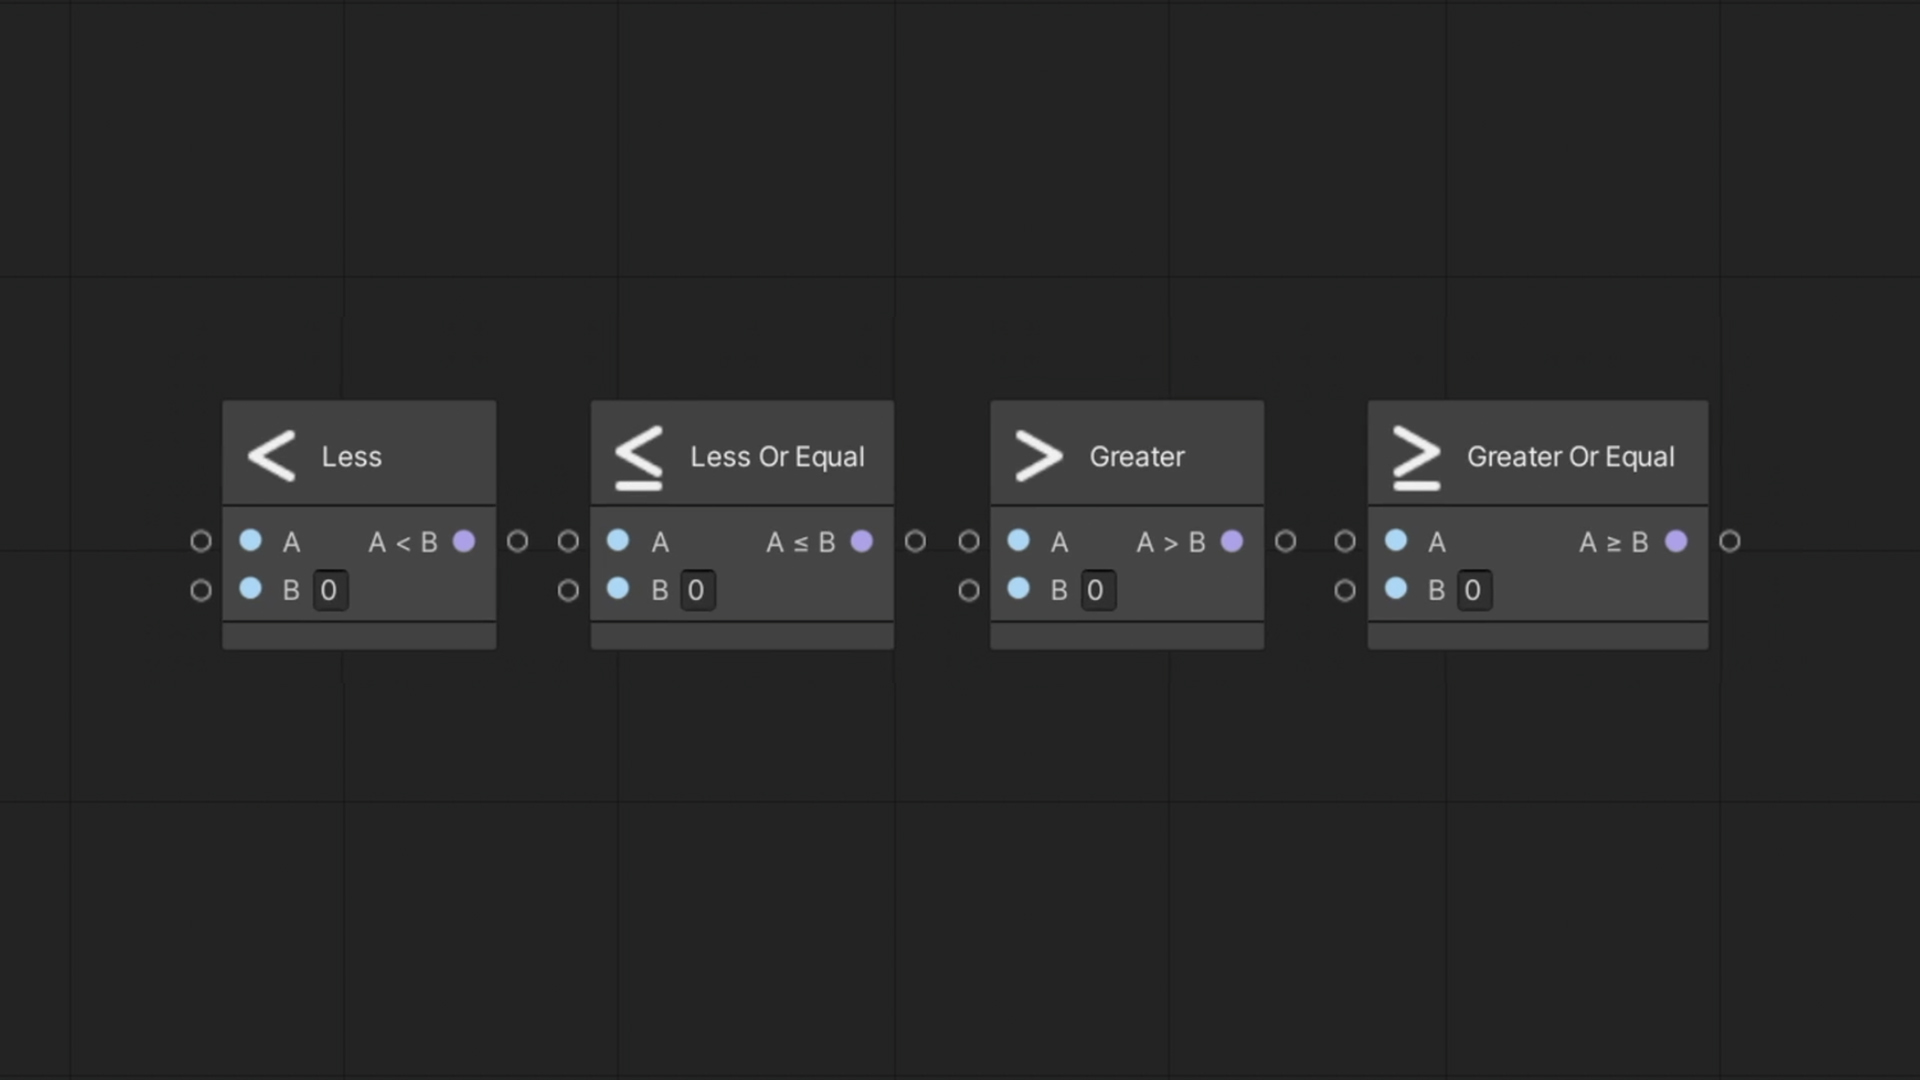 Unity Visual Scripting – Less, Less or Equal, Greater and Greater or Equal nodes